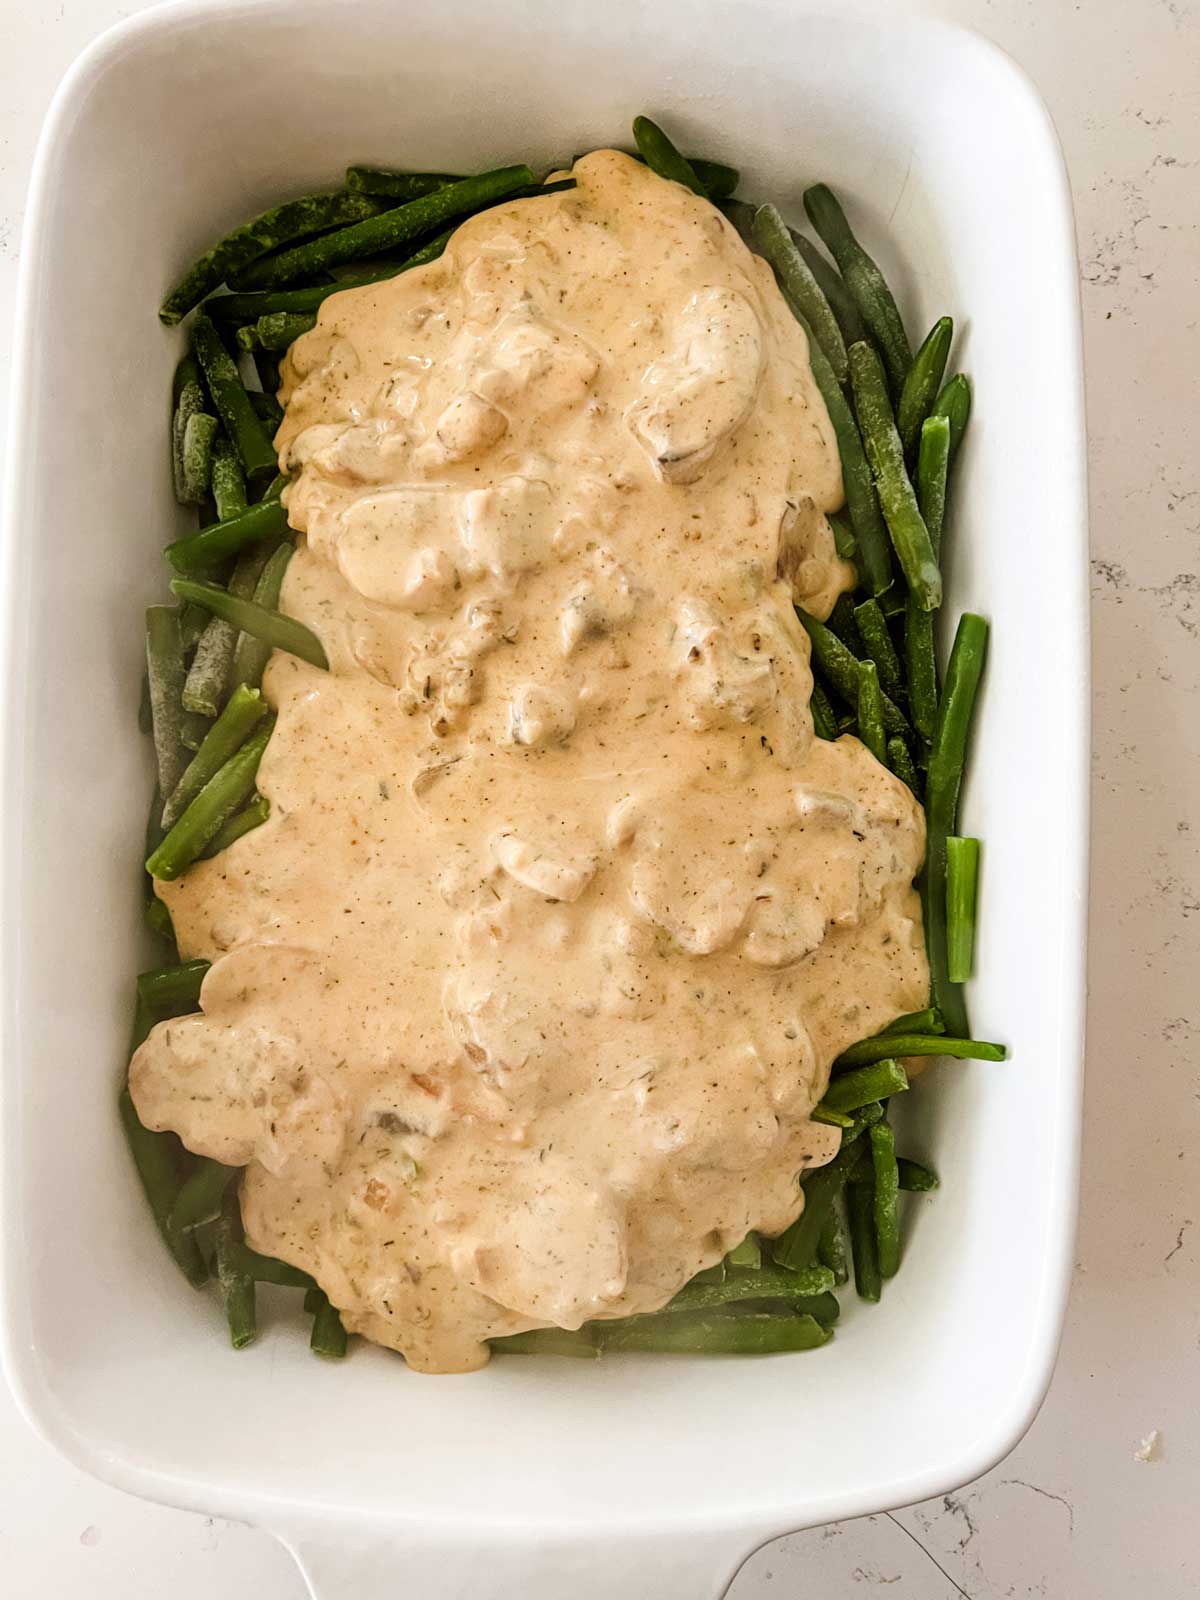 Frozen green beans with a homemade cream sauce on top of them in a casserole dish.